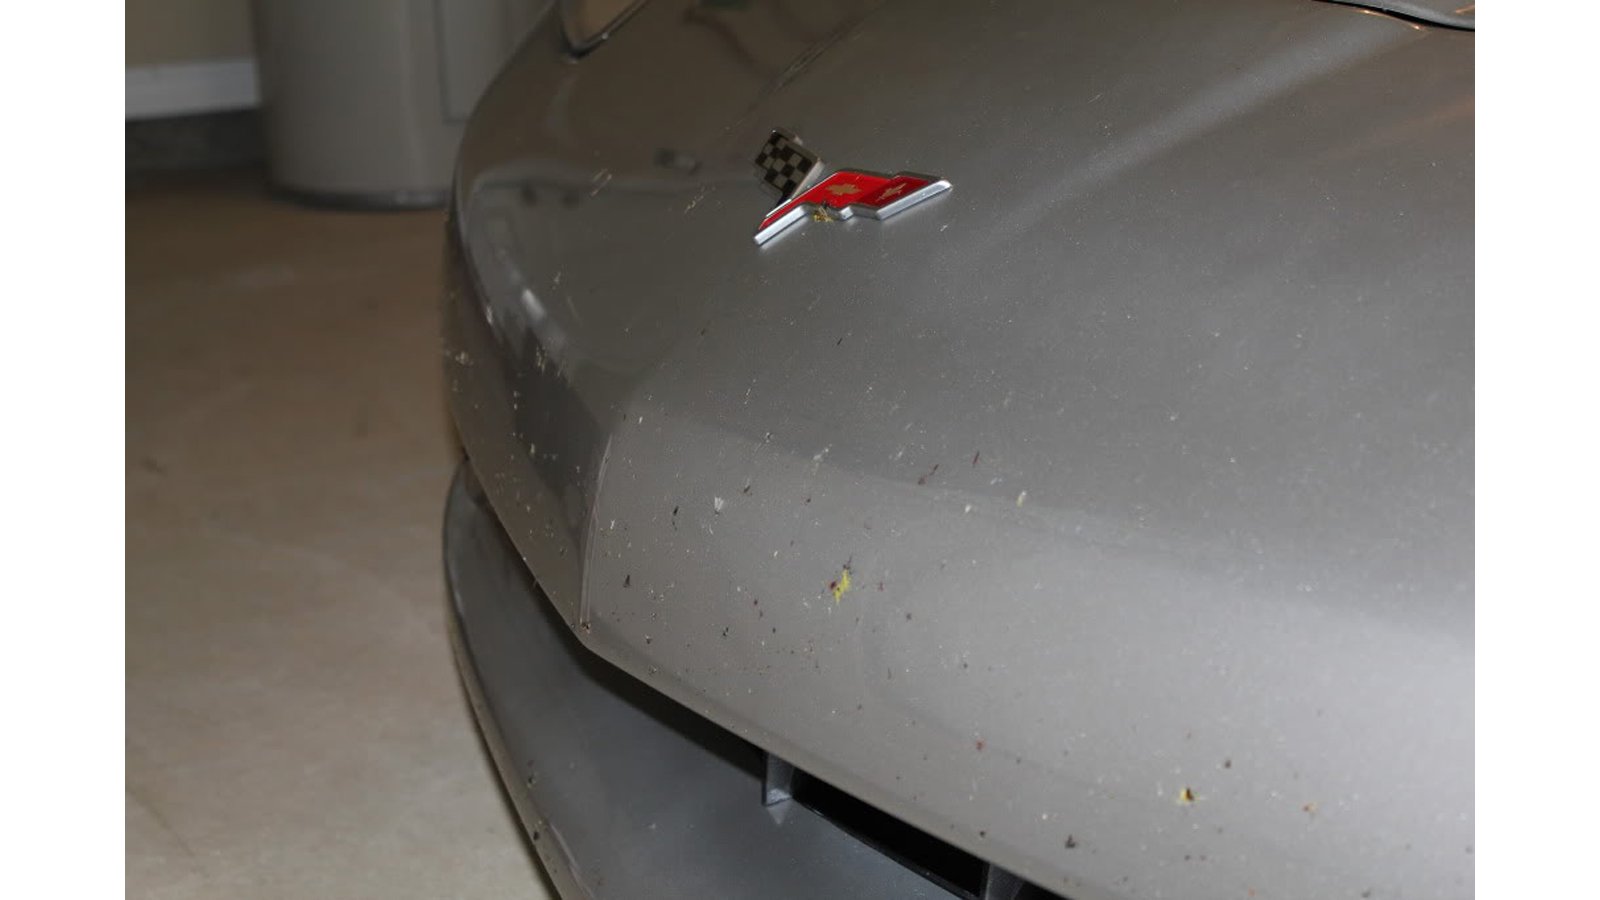 How-To Tuesday: Cleaning Your Corvette’s Bumper Bug Guts